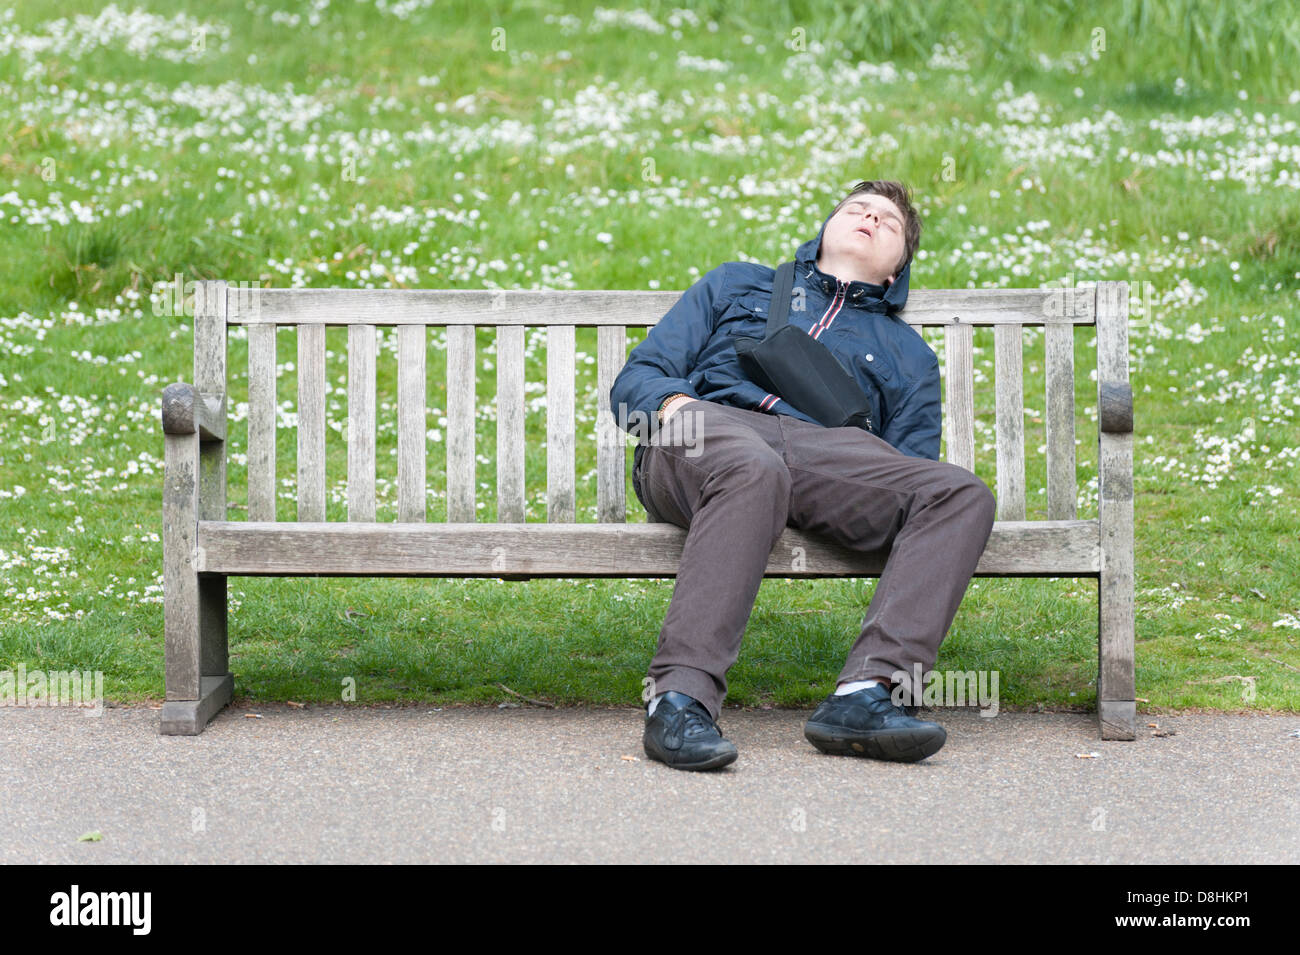 Man asleep on bench hi-res images photography - Alamy stock and